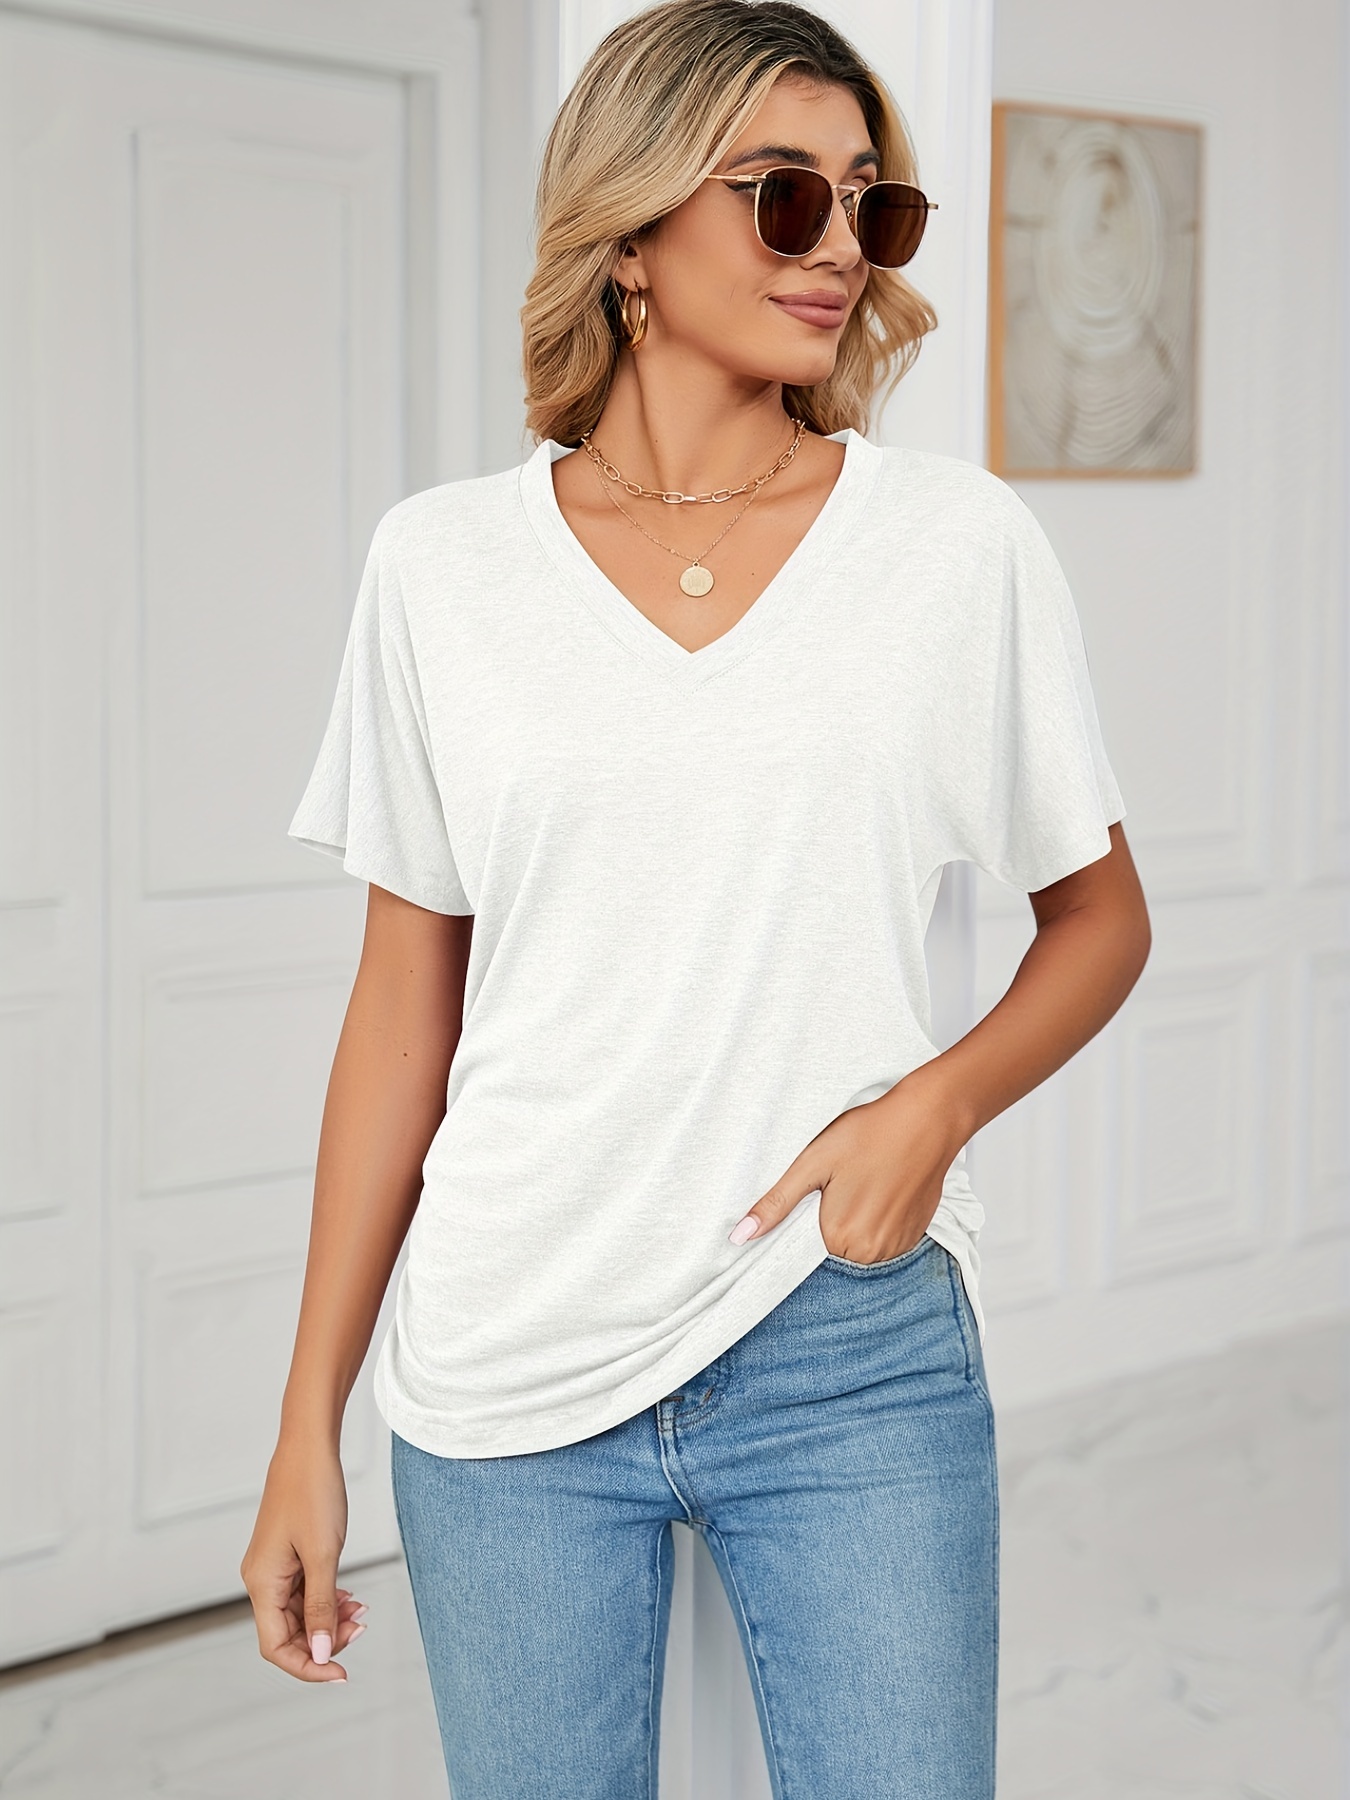 Loose Casual Long Blouse Women Short Sleeve Solid Black White